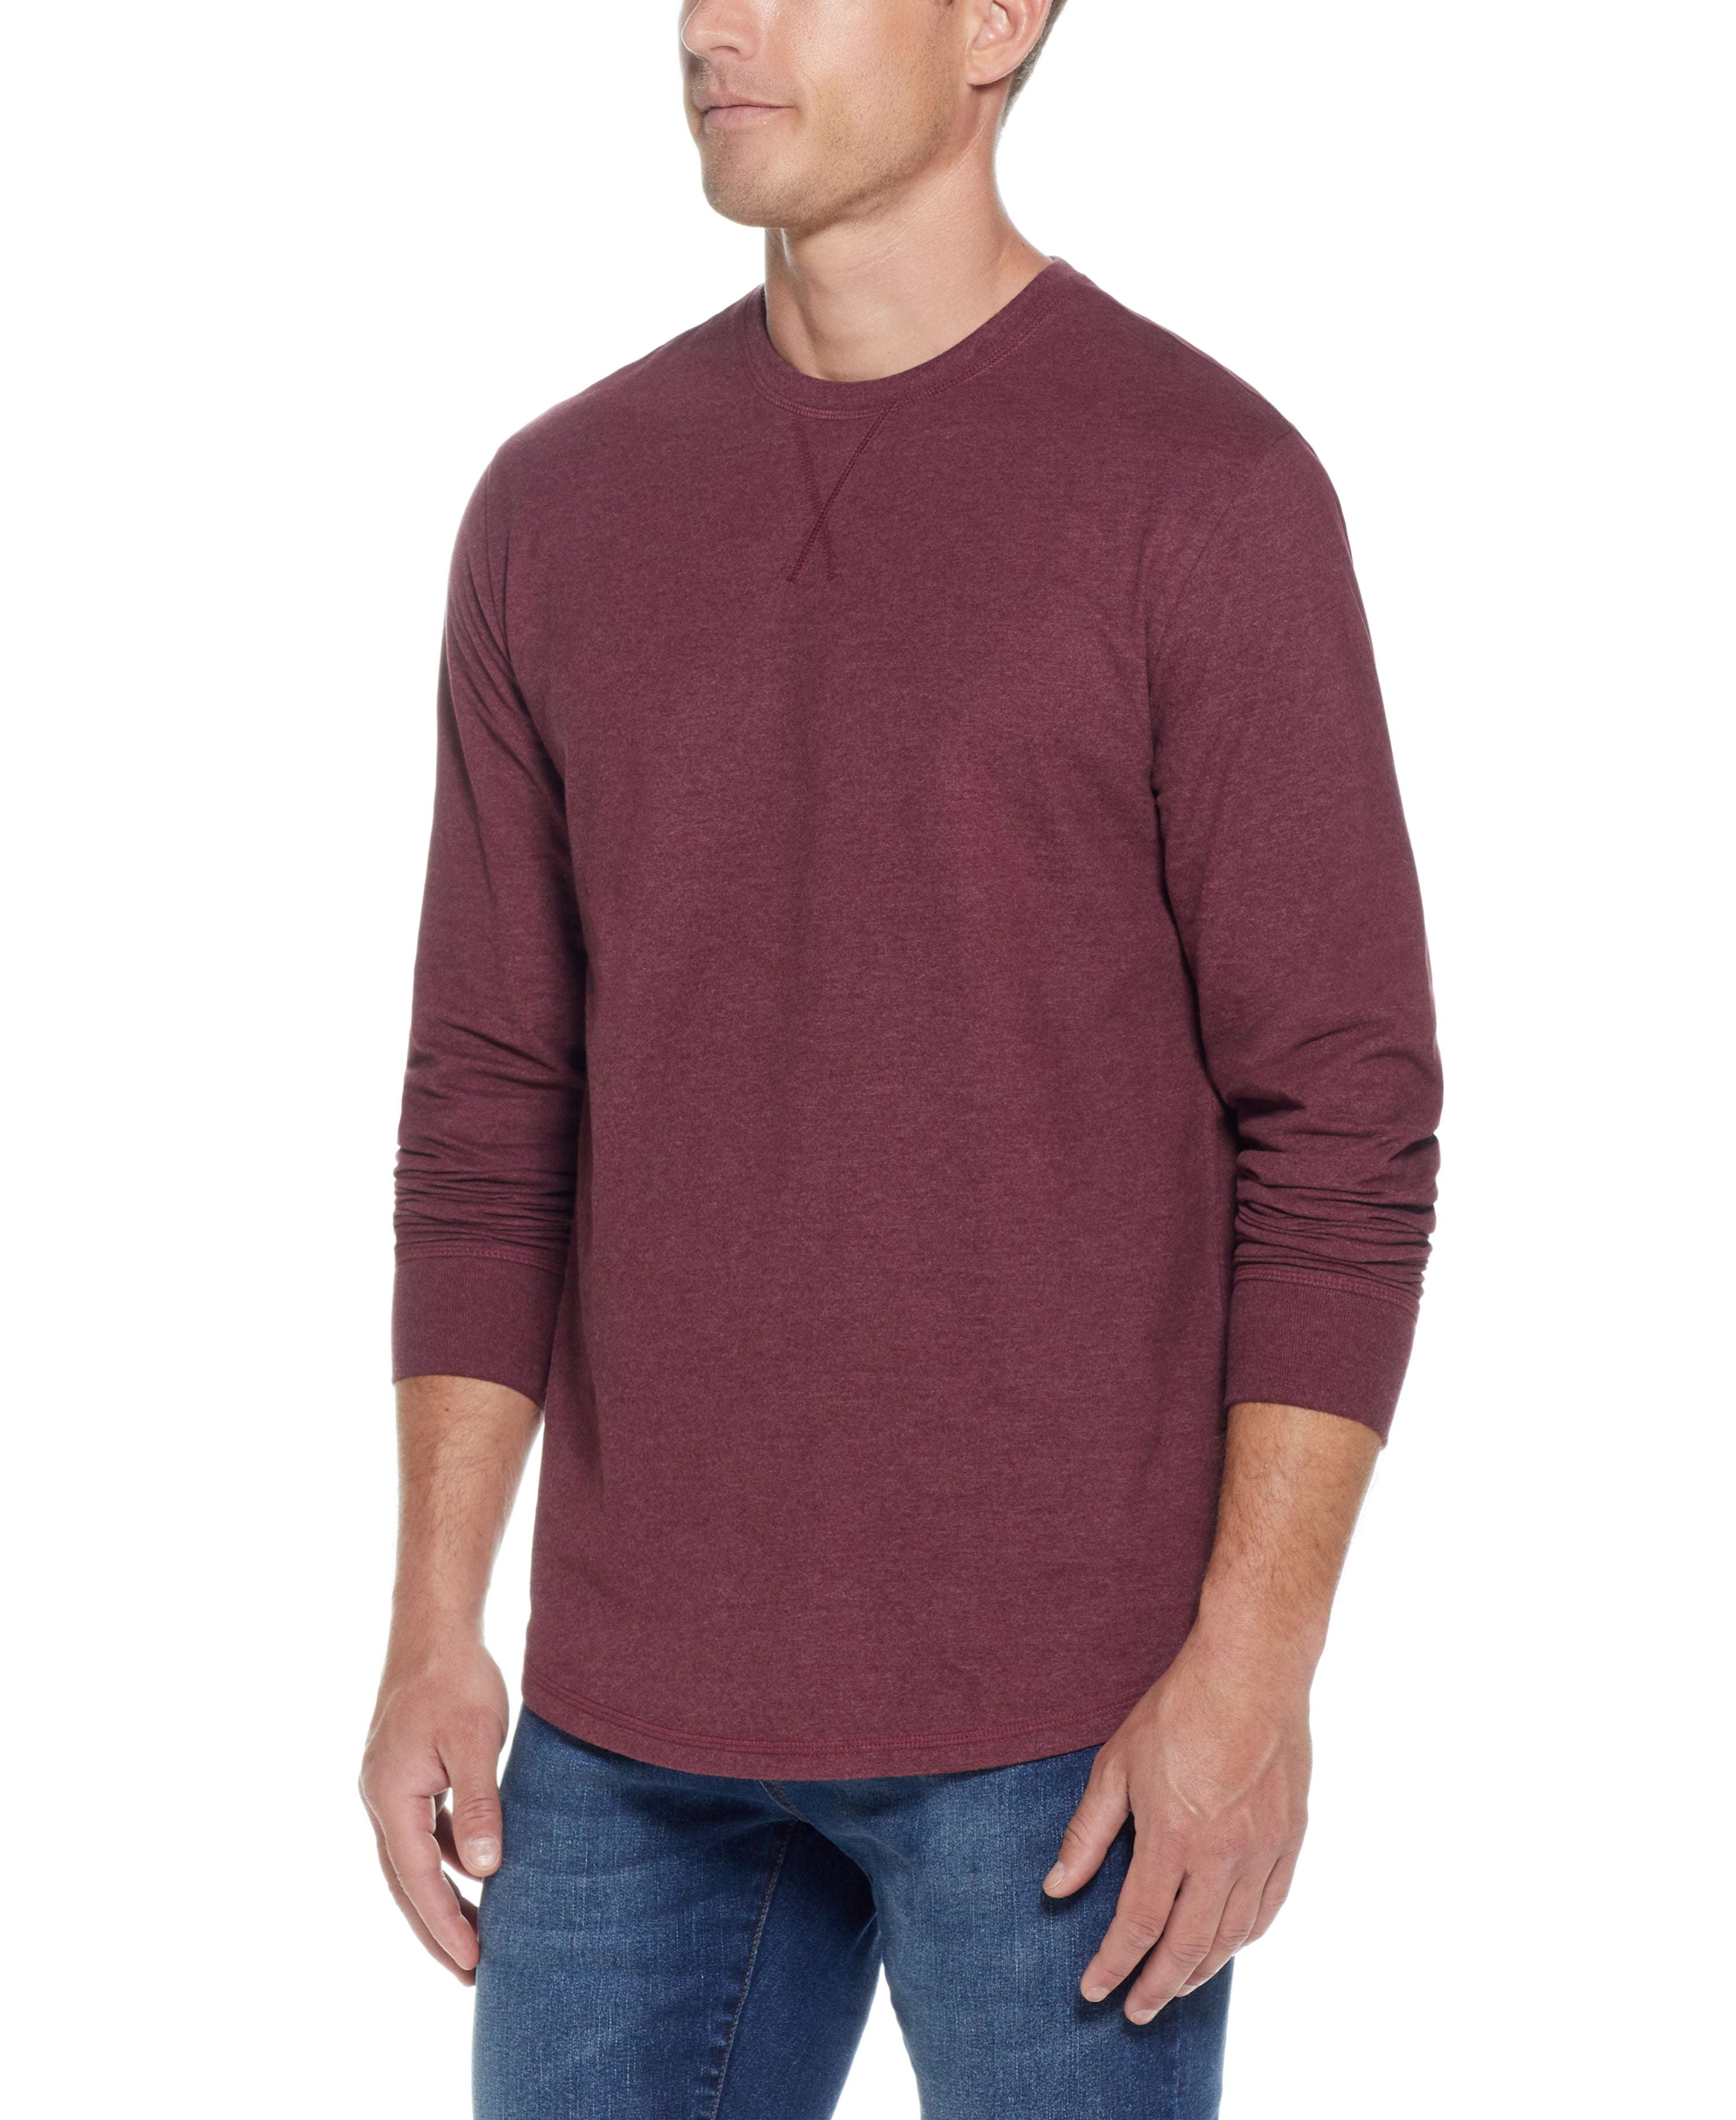 LONG SLEEVE BRUSHED JERSEY CREW in CABERNET HTHR